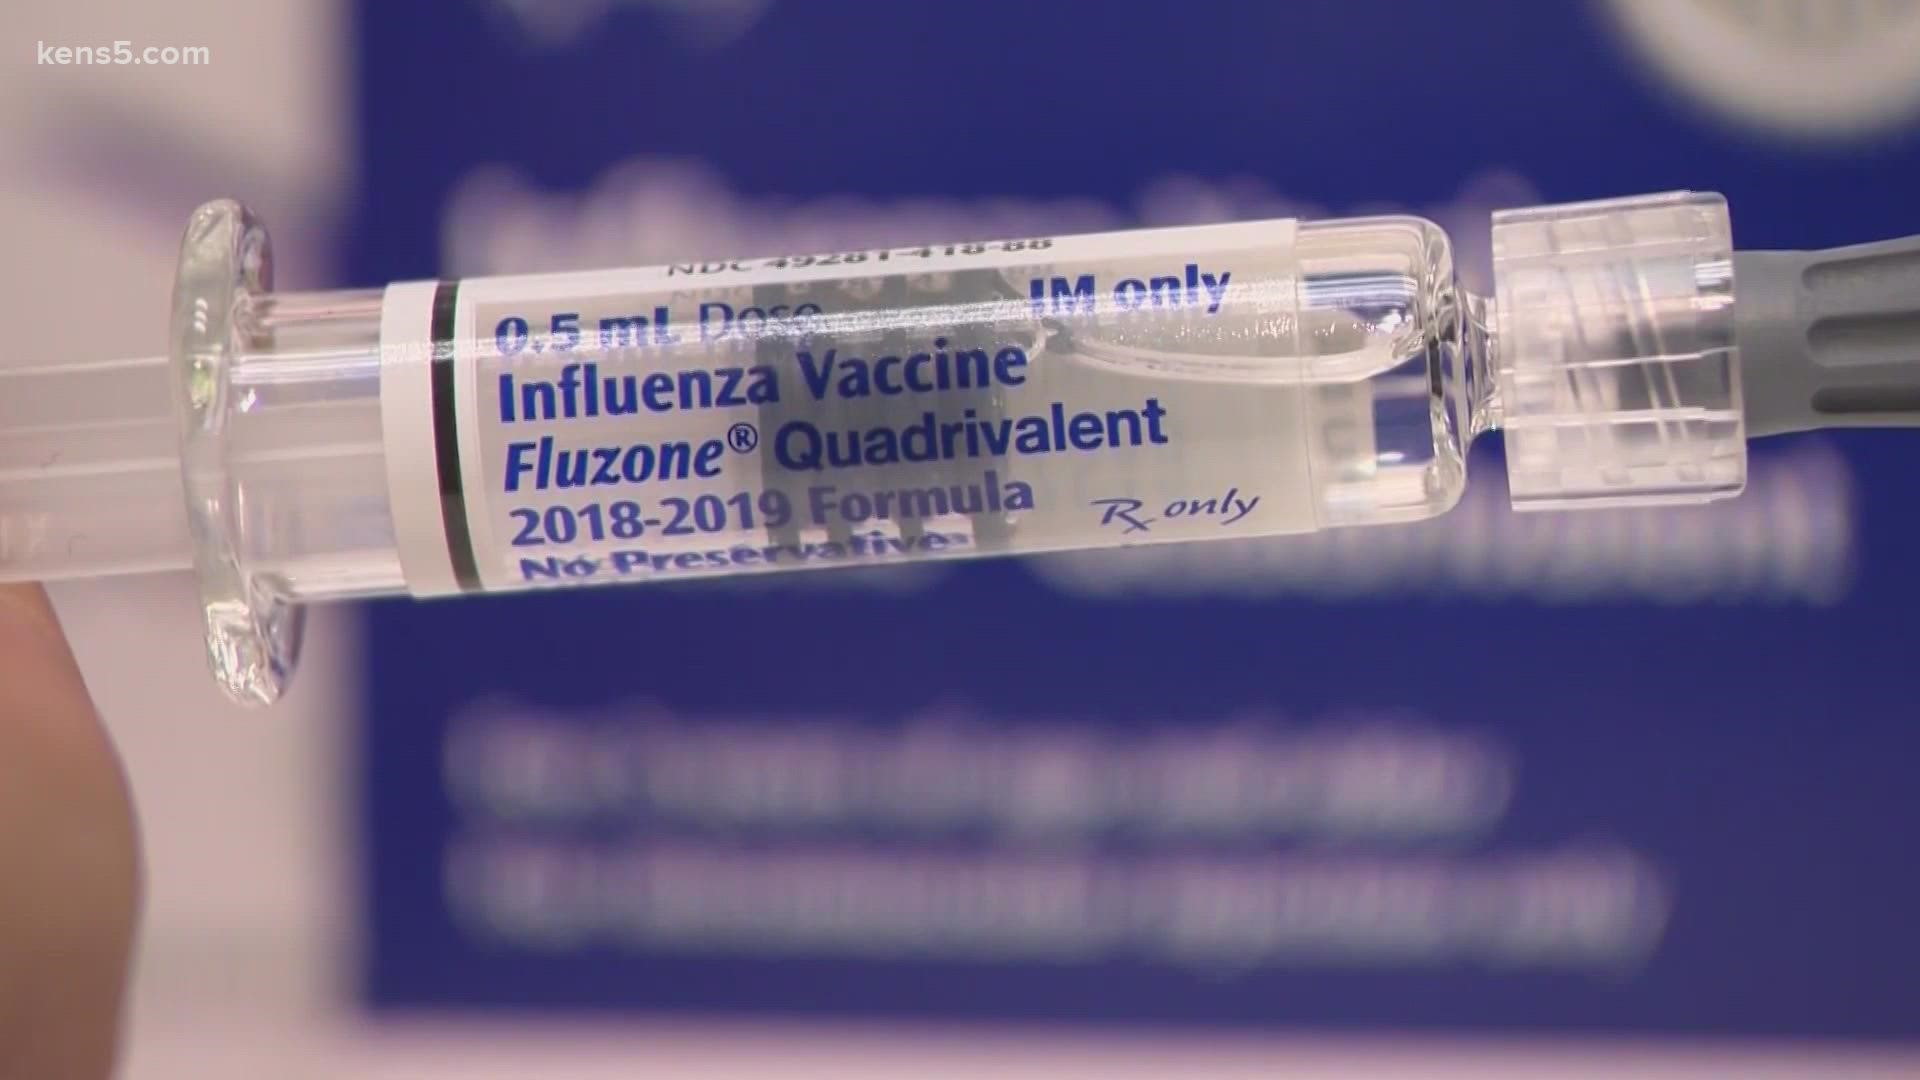 There are several shots available, including a high-dose vaccine for seniors.